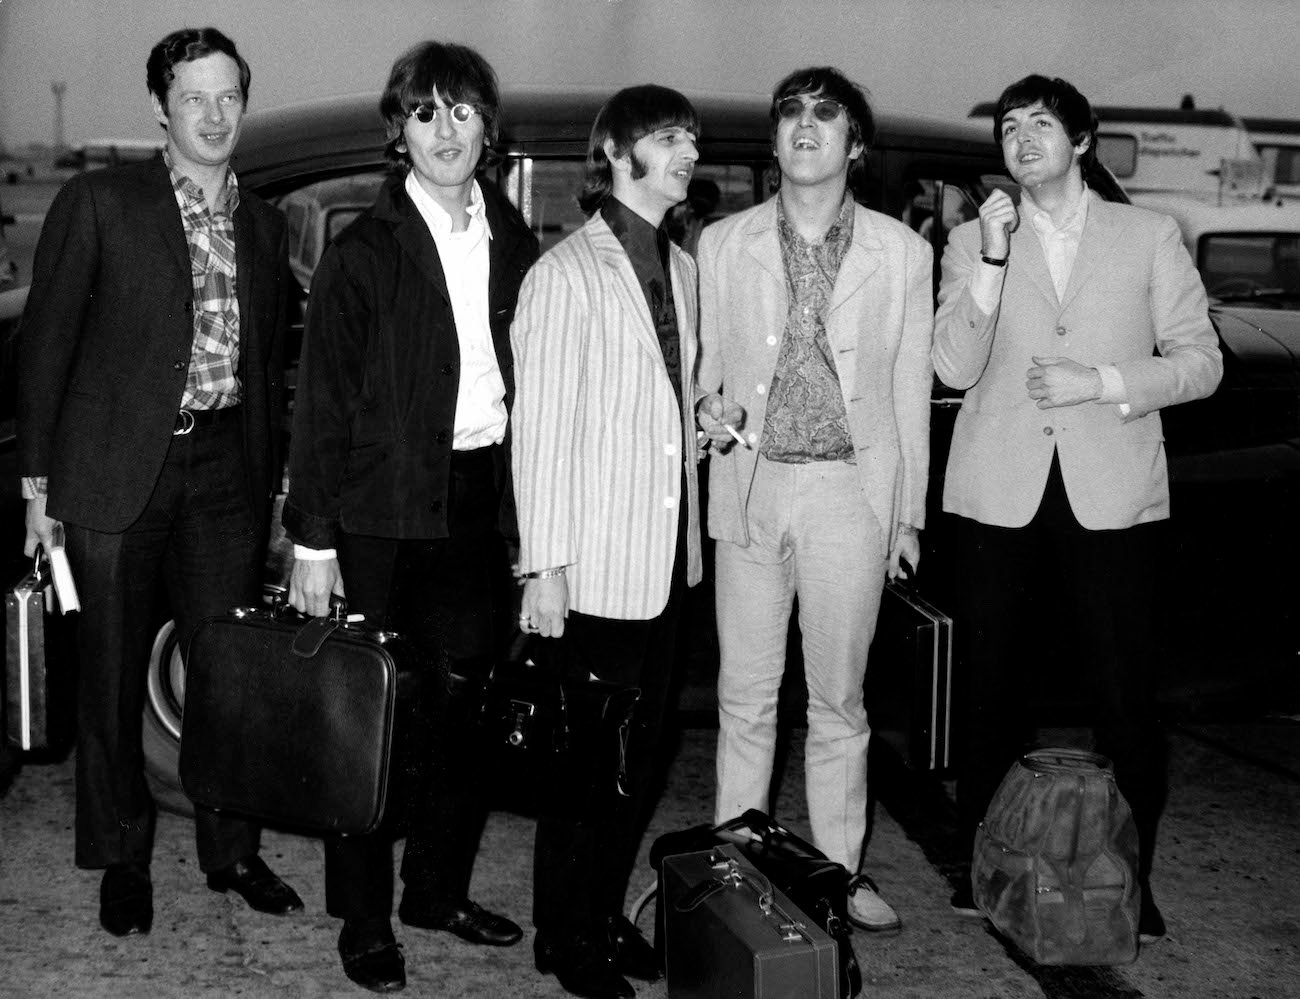 The Beatles and their manager, Brian Epstein, arriving at Heathrow Airport following a tour in 1966.